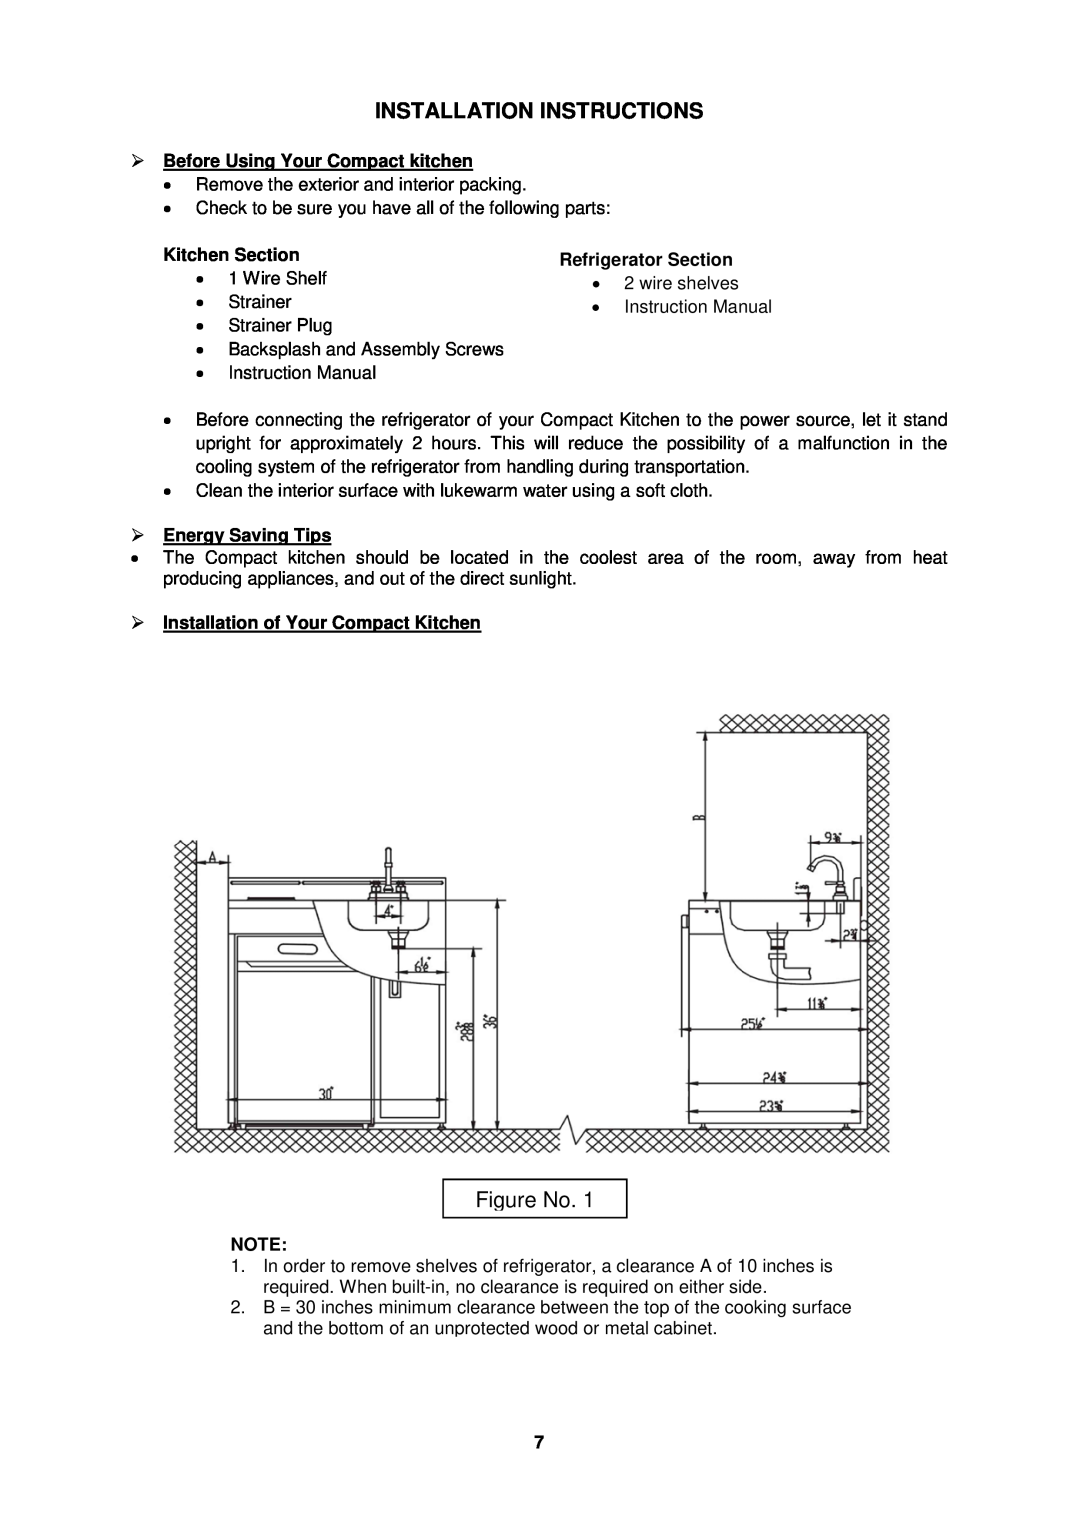 Avanti CK3016 instruction manual Installation Instructions, Figure No, Before Using Your Compact kitchen, Kitchen Section 